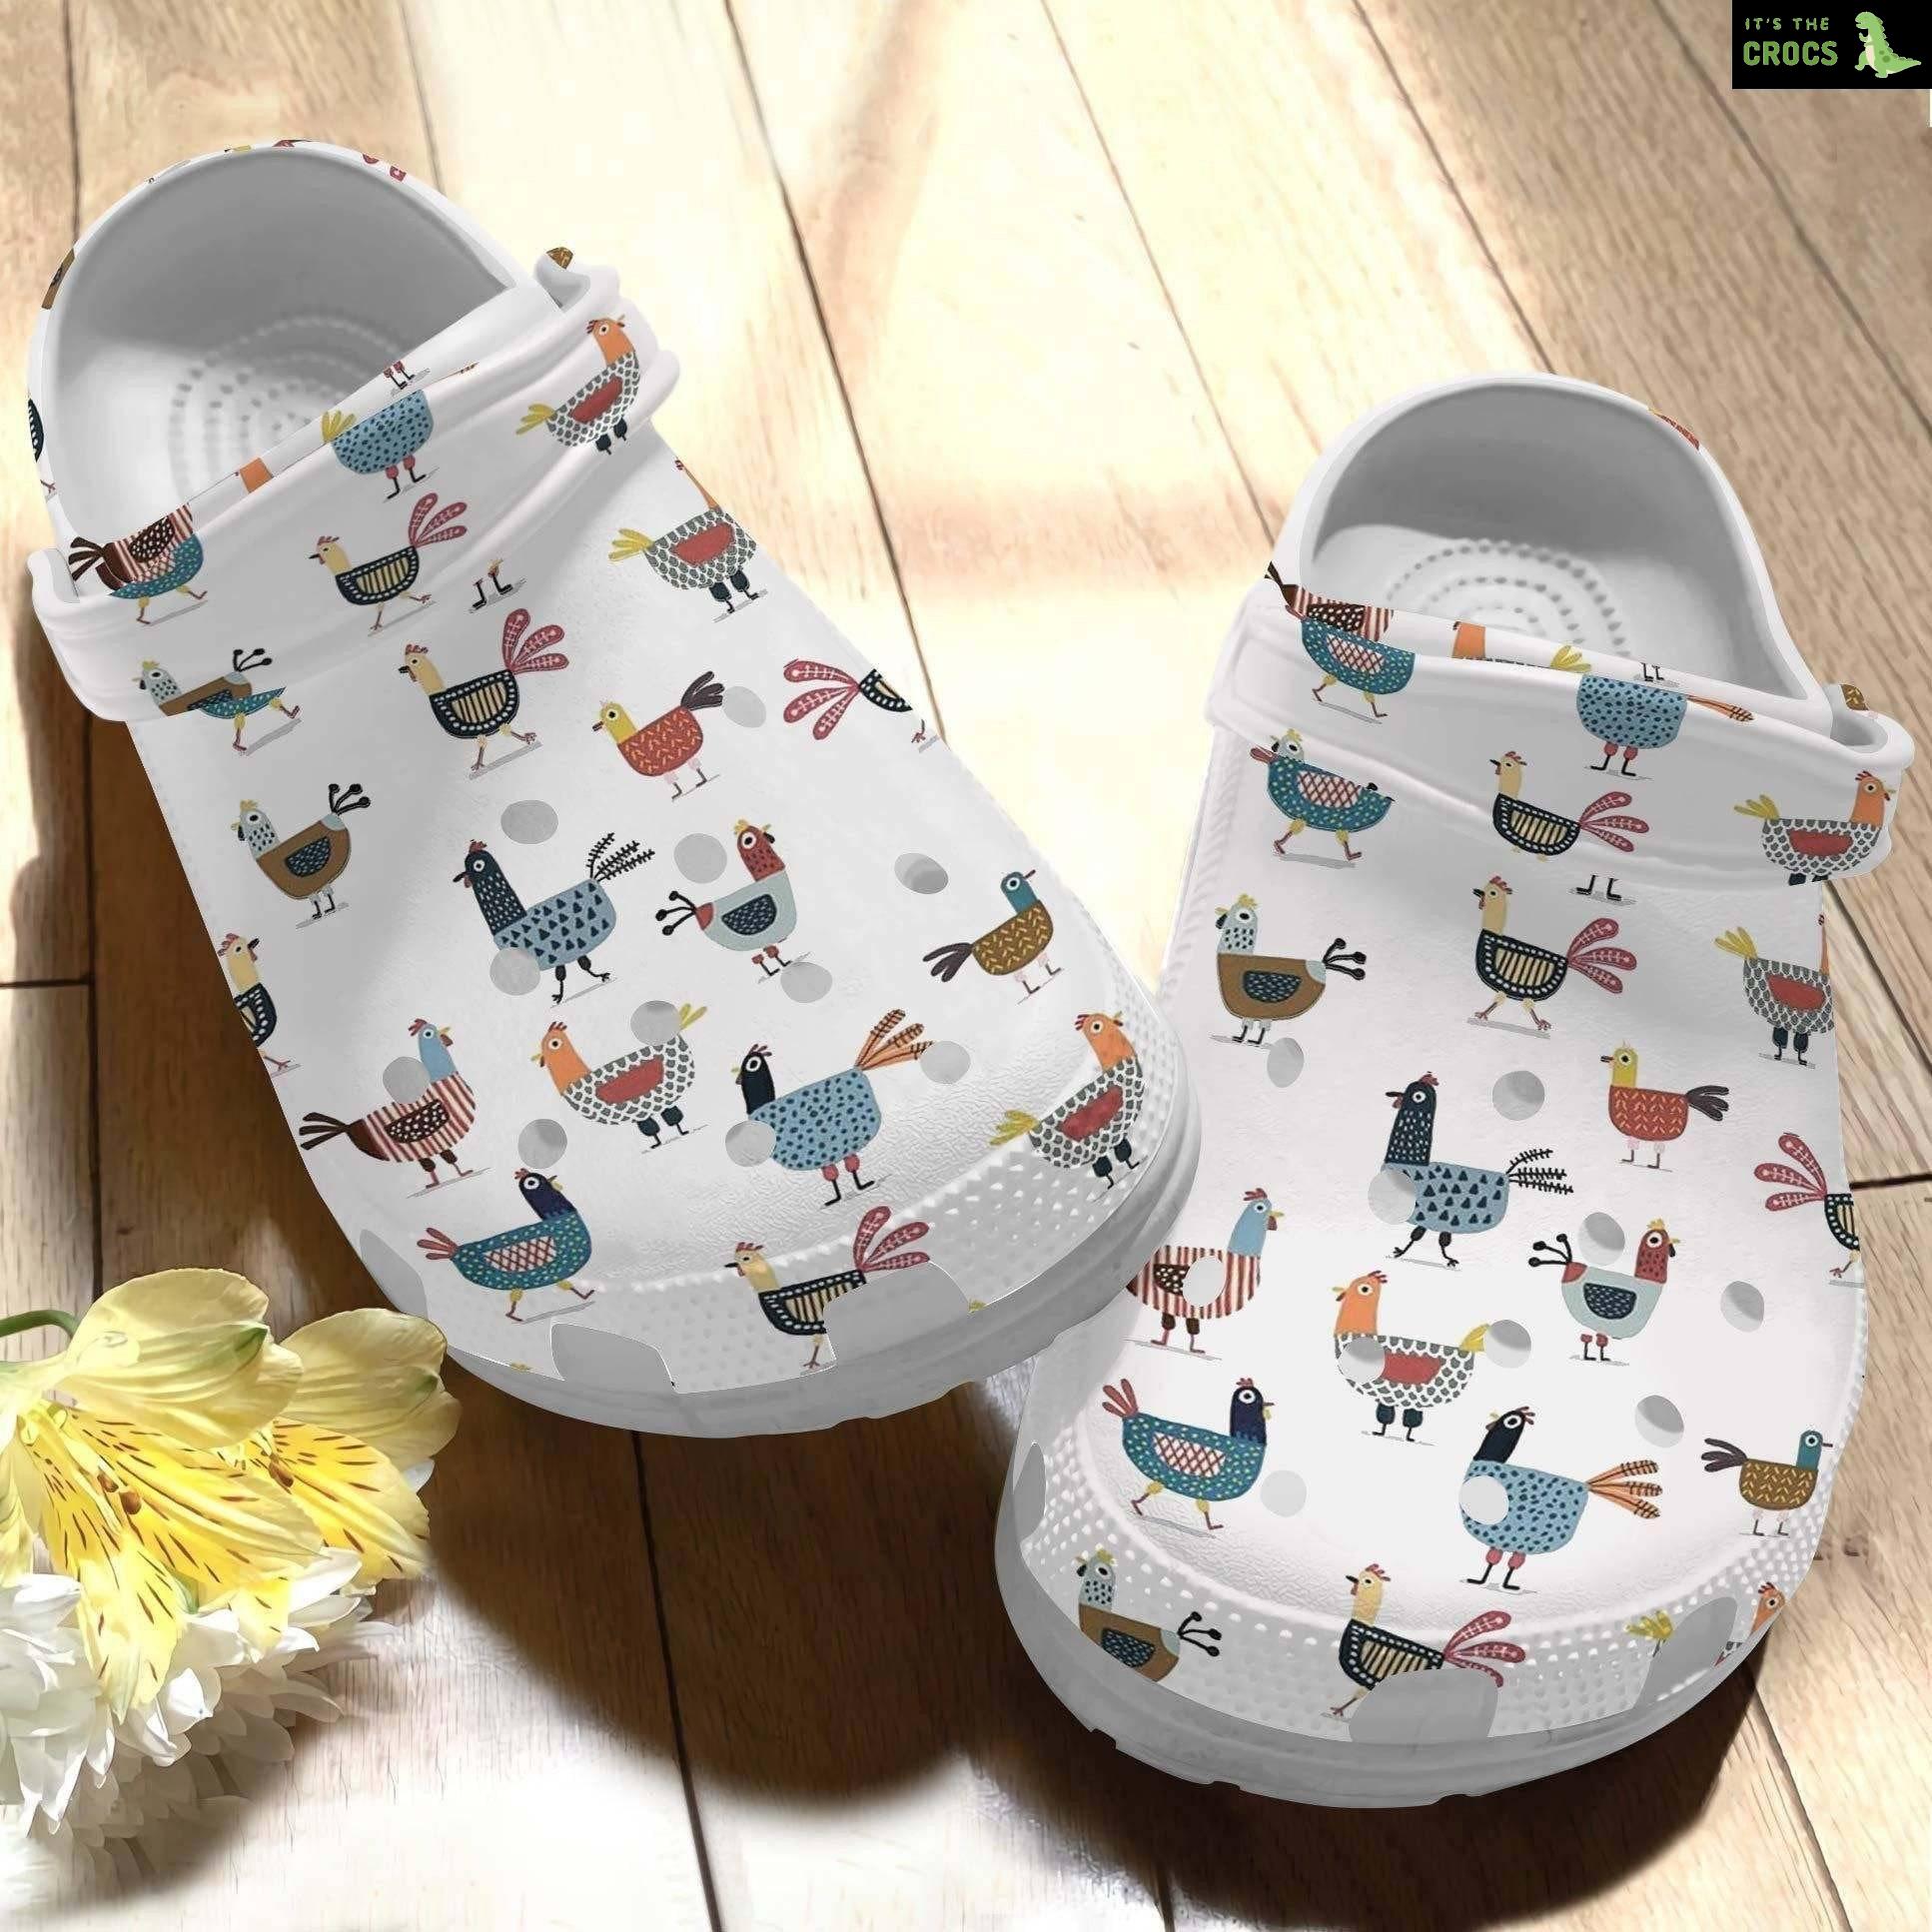 Chicken Art Funny Croc Crocs Shoes Crocbland Clog Birthday Gifts For Son Daughter